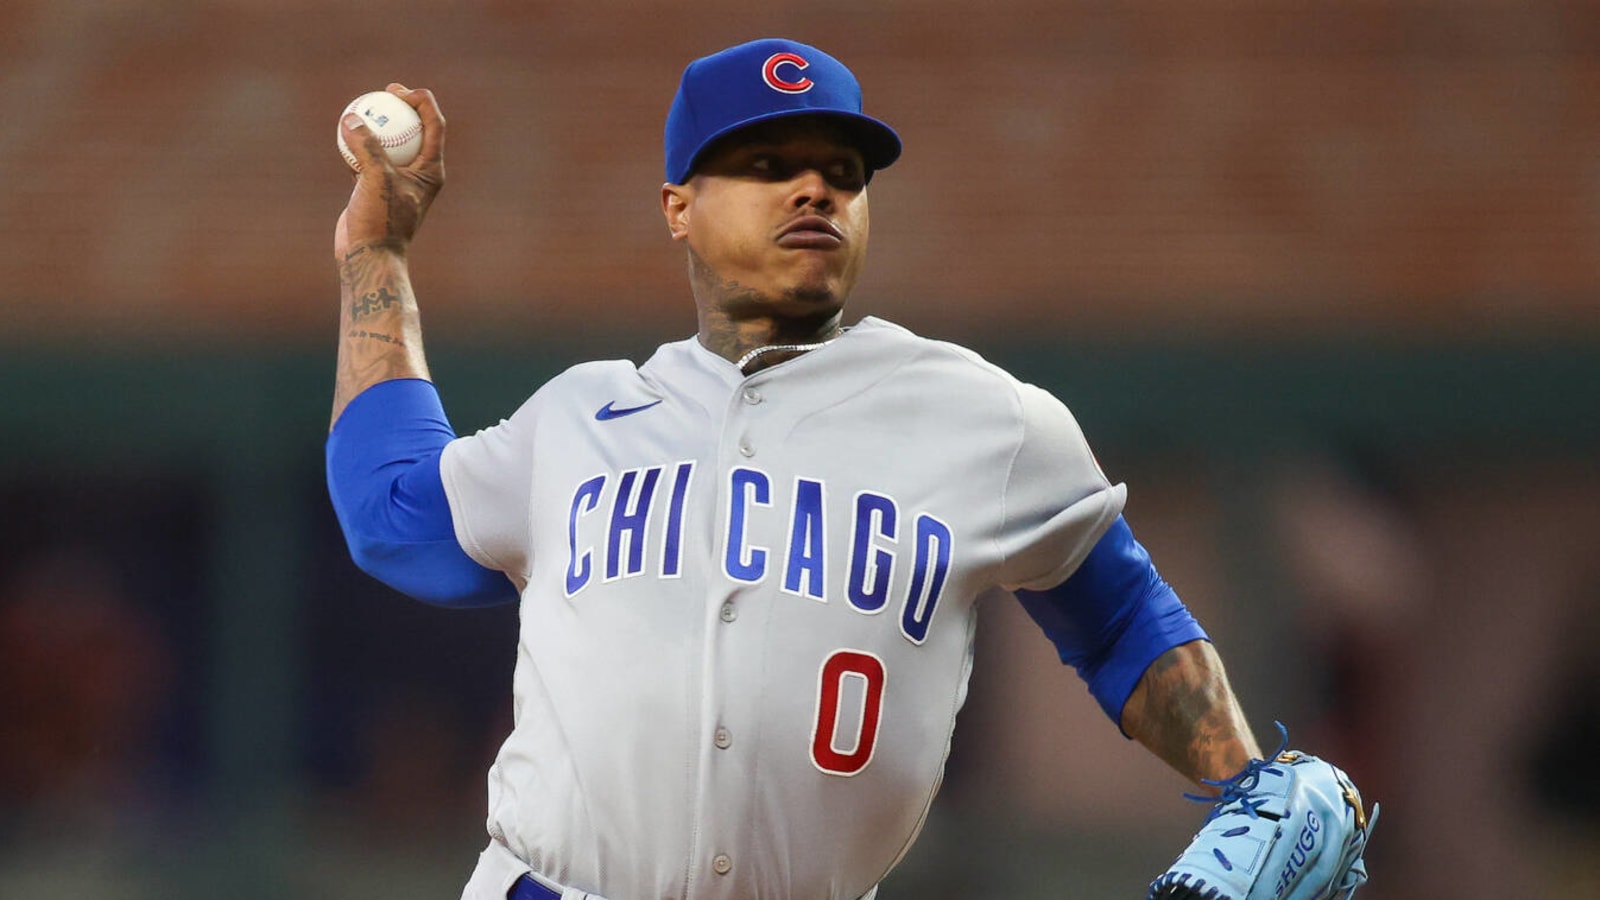 Marcus Stroman's new Yankees contract contains an interesting clause